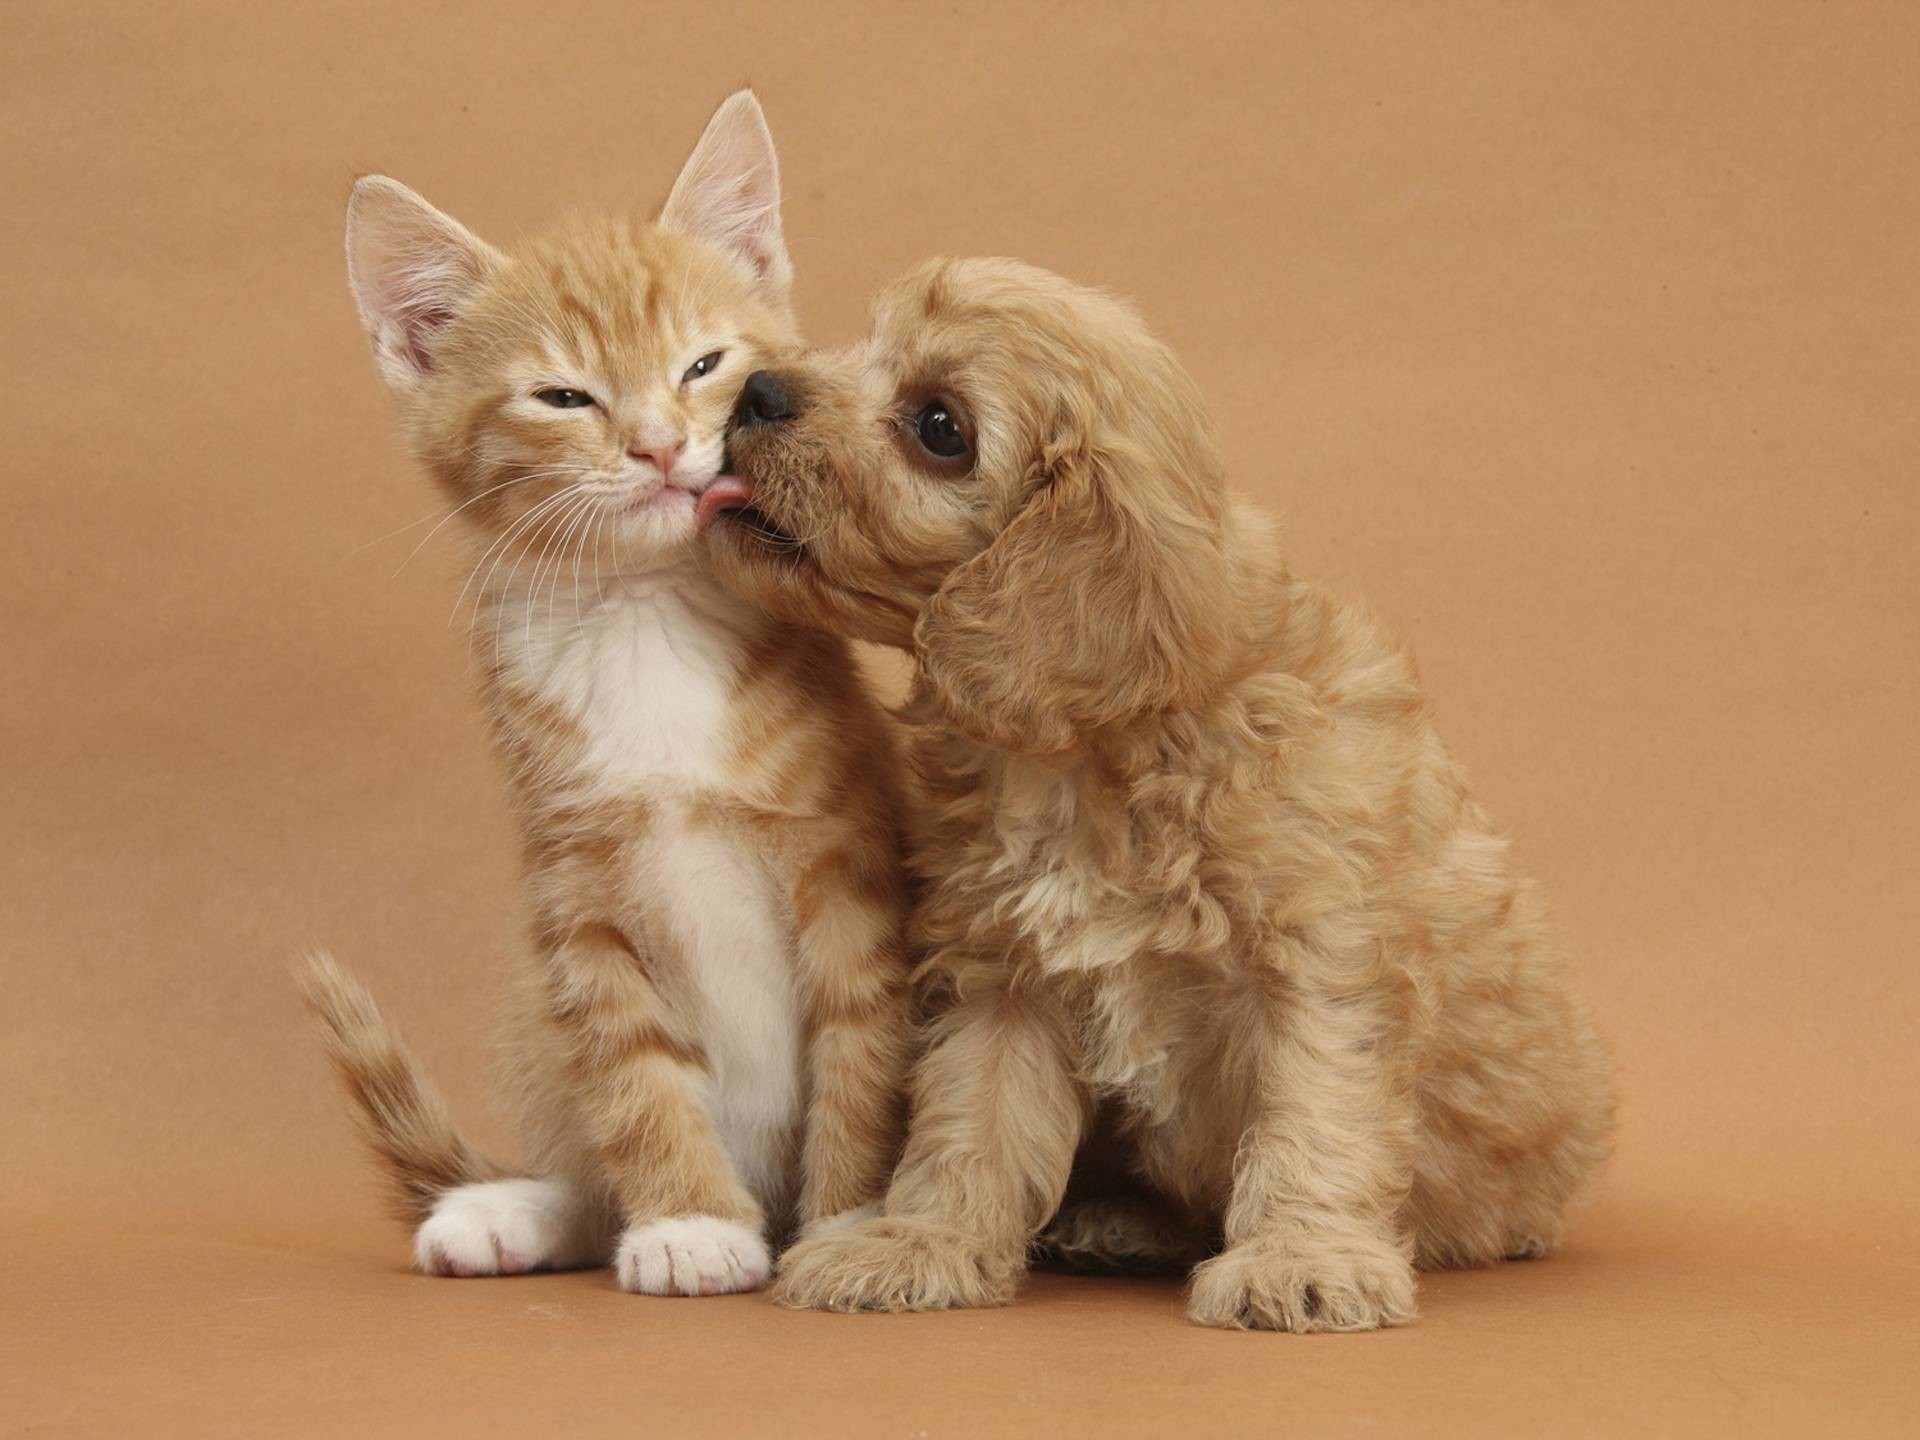 1920x1440 Cute dog and cat - Dogs Wallpaper how to train your dog Check out the  information